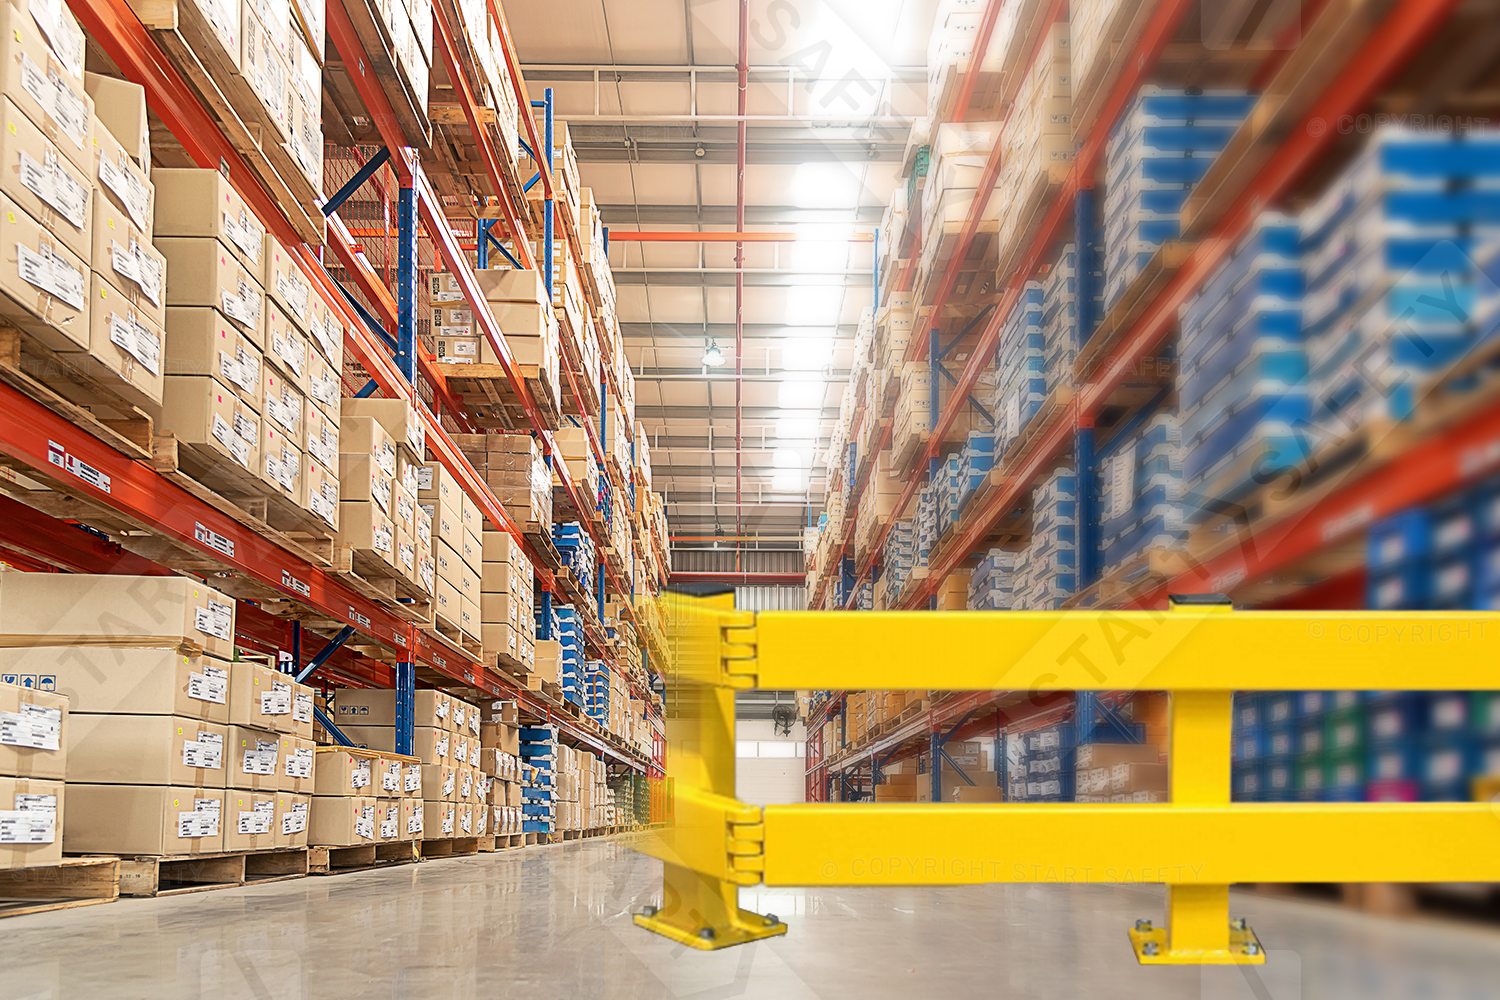 Impact Protection Rail In Warehouse Environment